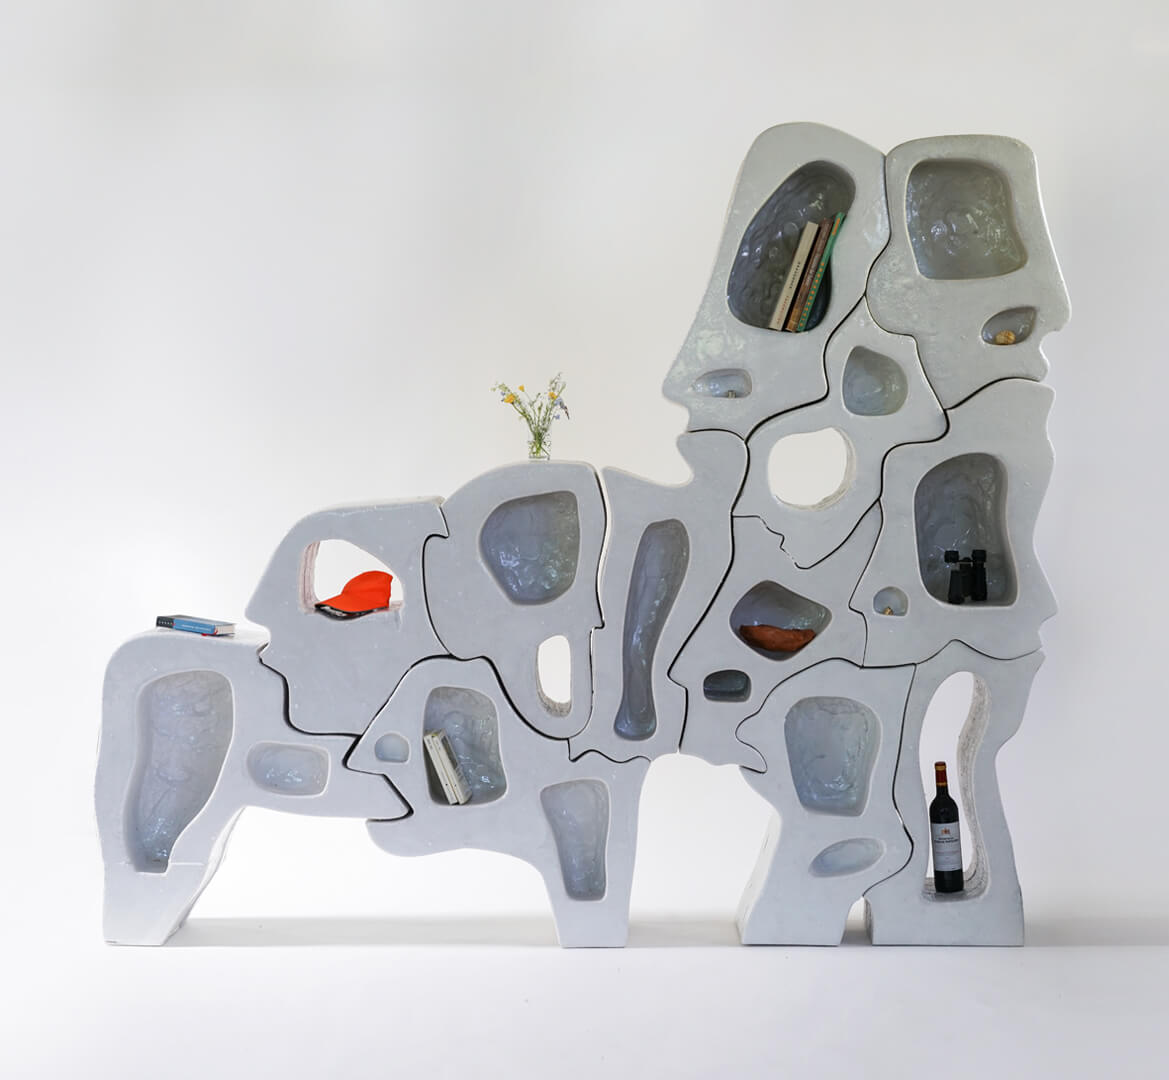 Freia Achenbach's &lsquo;Spectator&rsquo; mirrors animal and human mannerisms